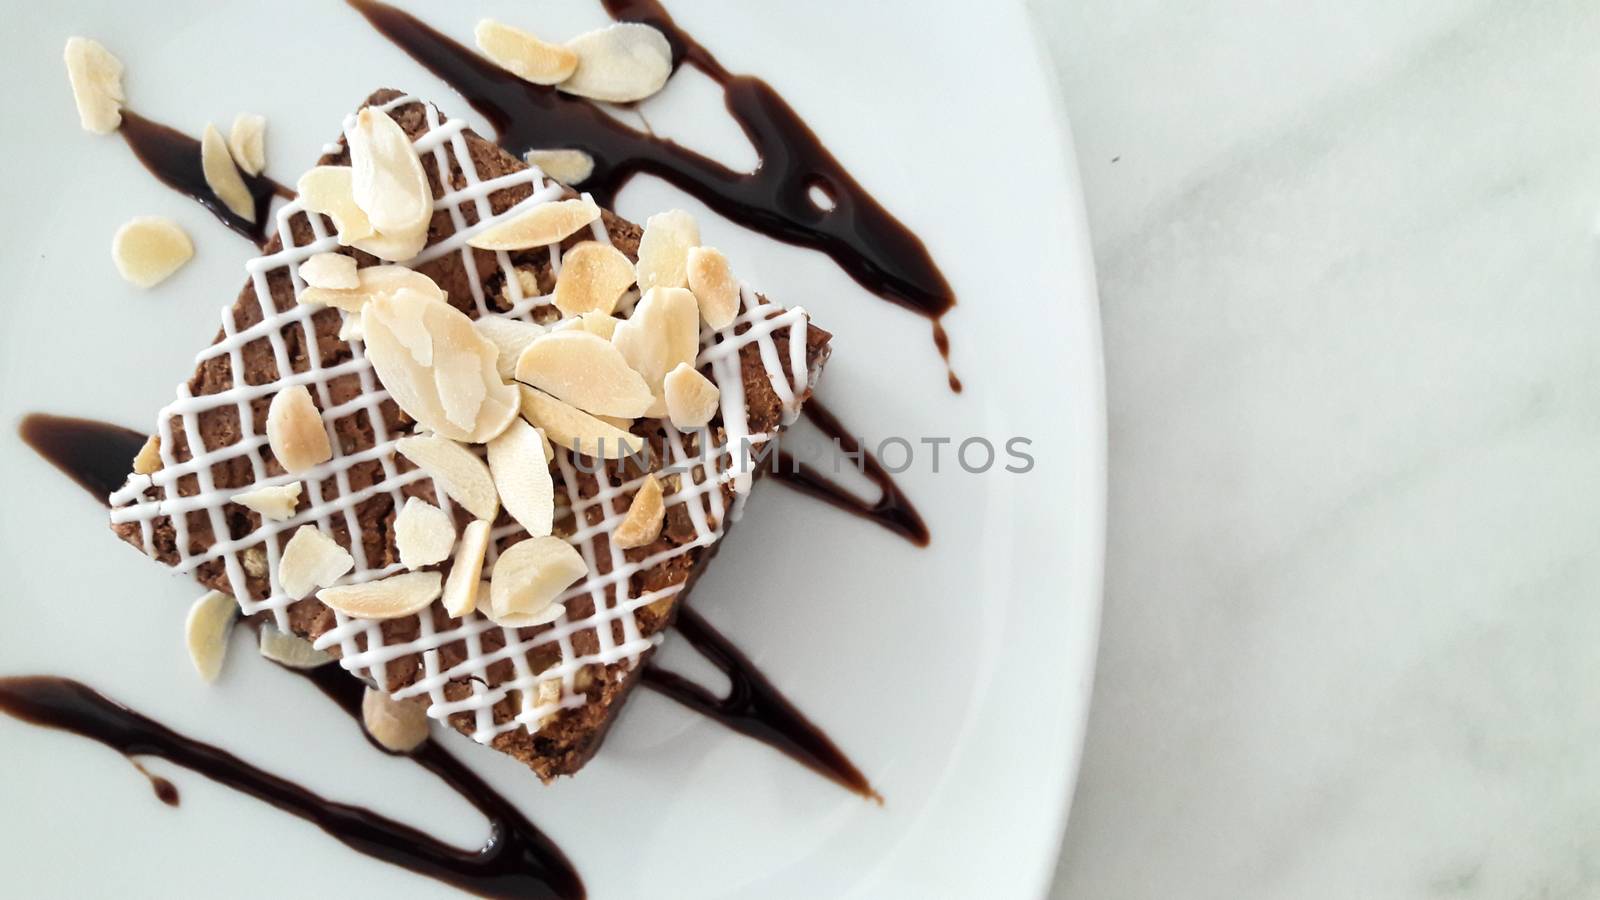 Top view of chocolate brownie with sliced almond on white plate background